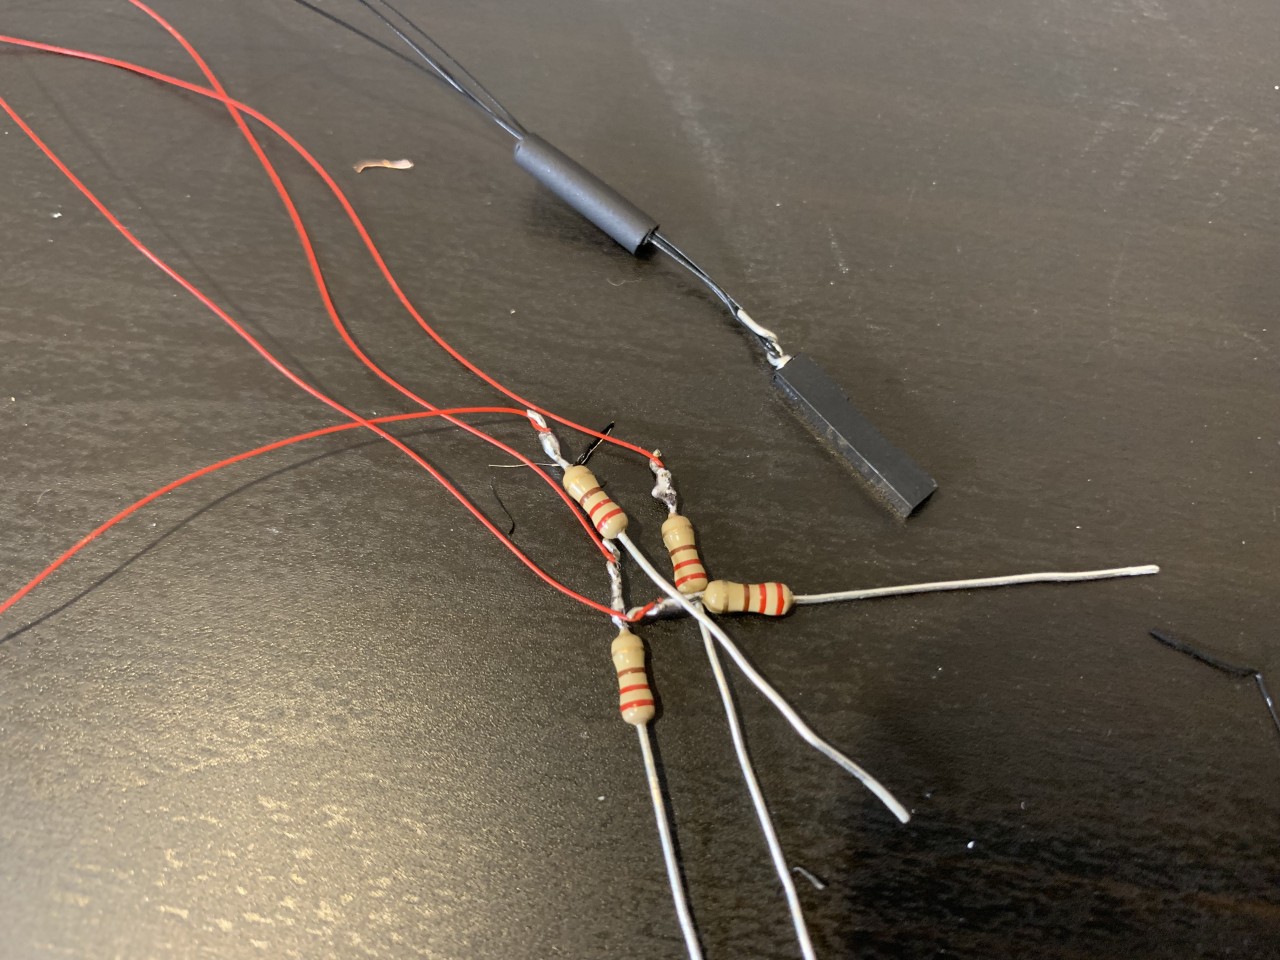 Connect each LED to a resistor, and tie all negative lines to ground